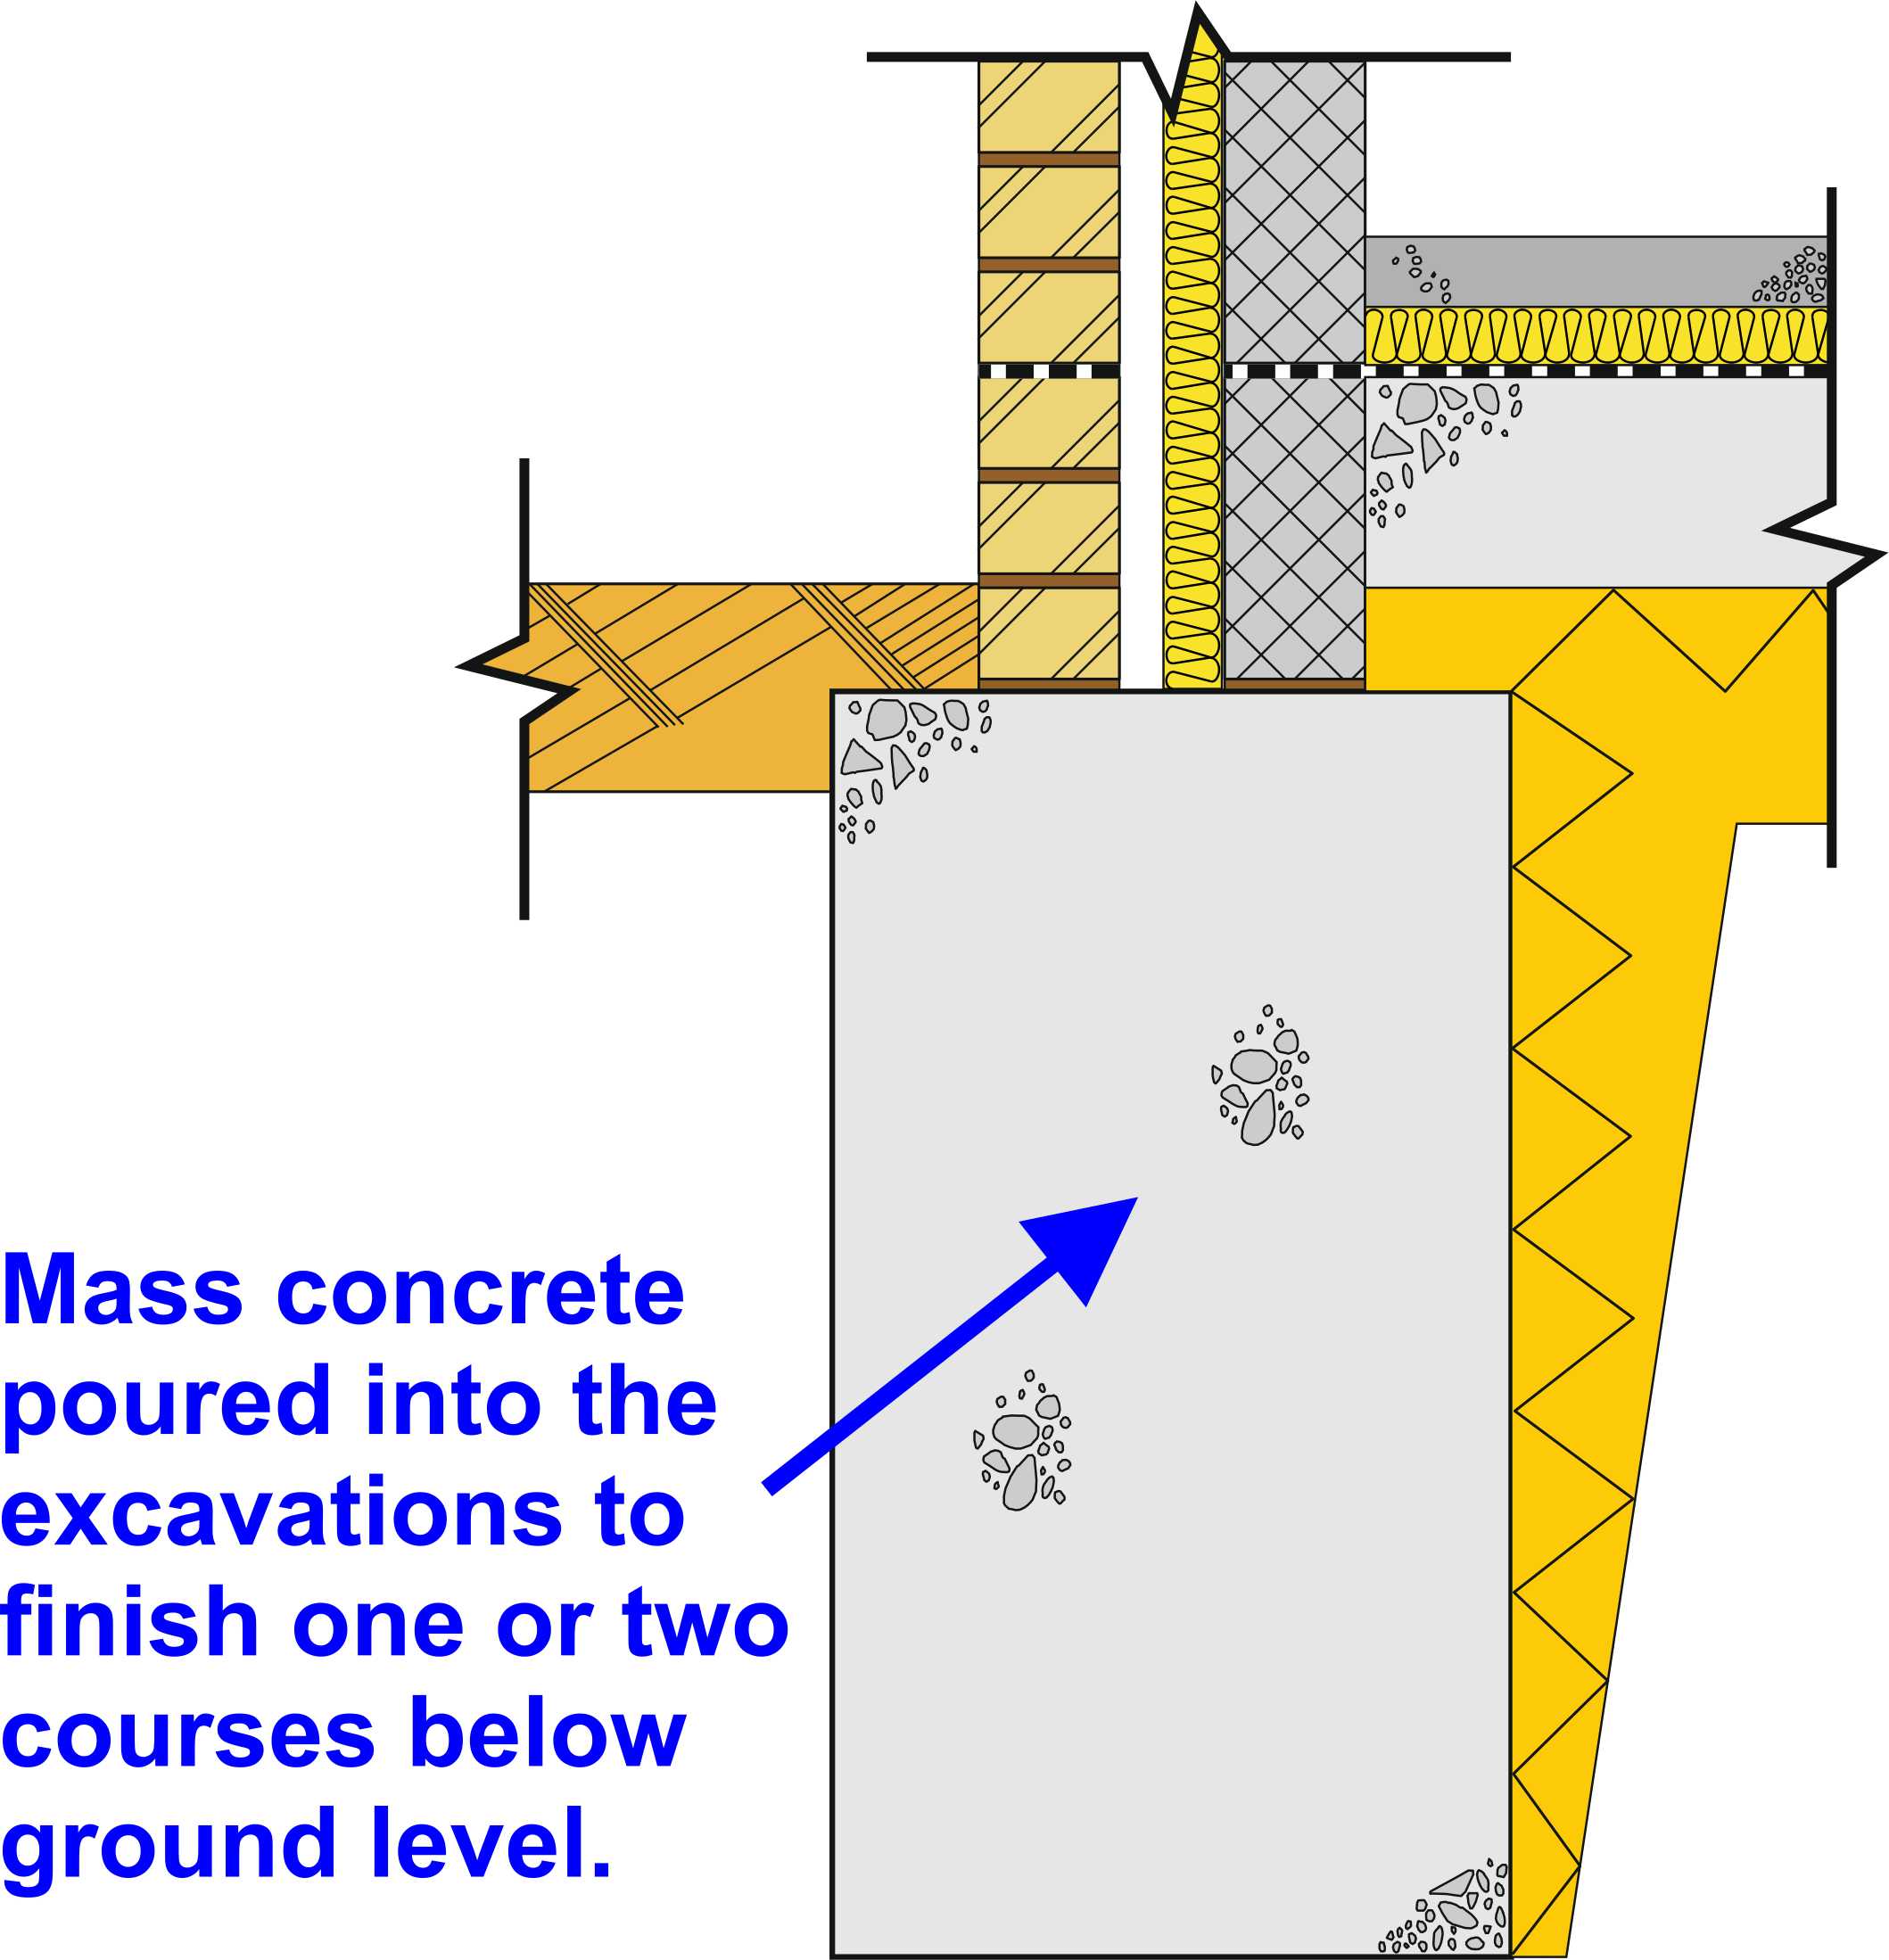 Foundation Trench-Fill